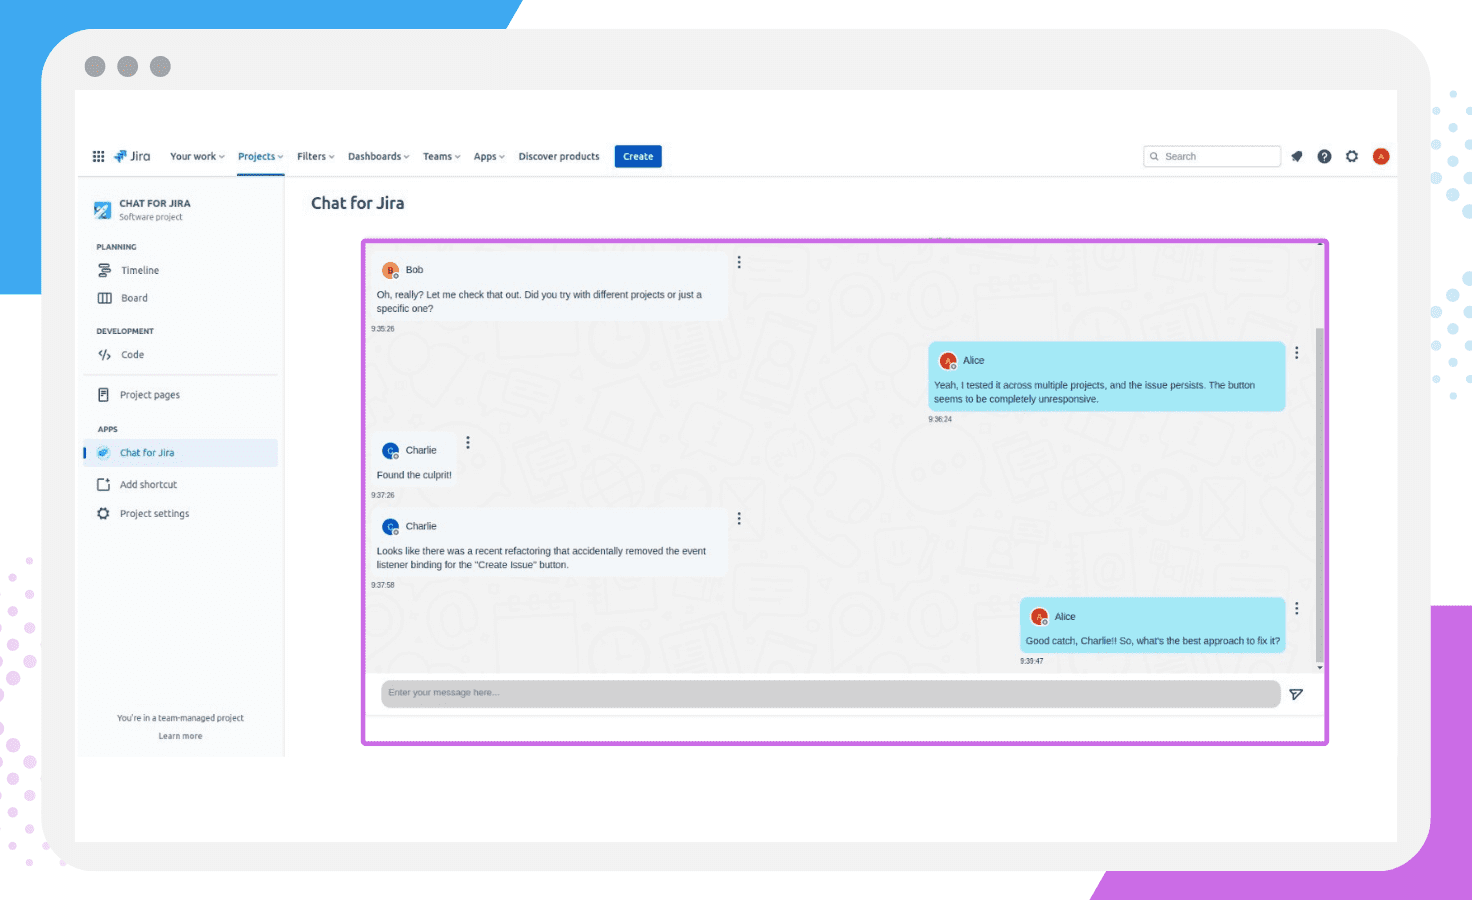 chat for jira app - web image - feature 1